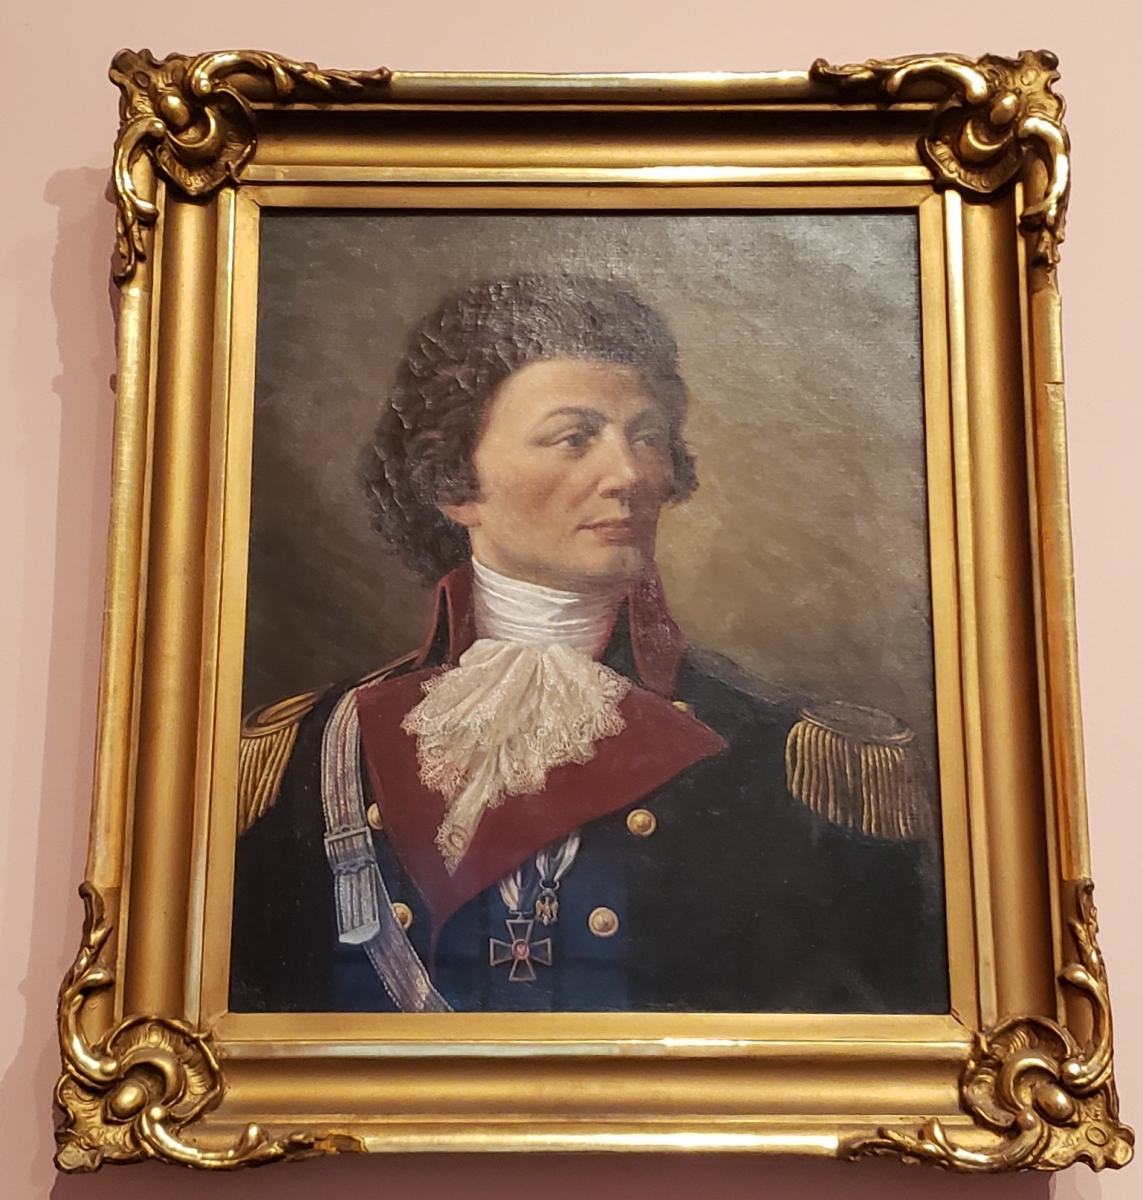 Tadeusz Kosciuszko Portrait located in the Second Bank of the United States Portrait Gallery